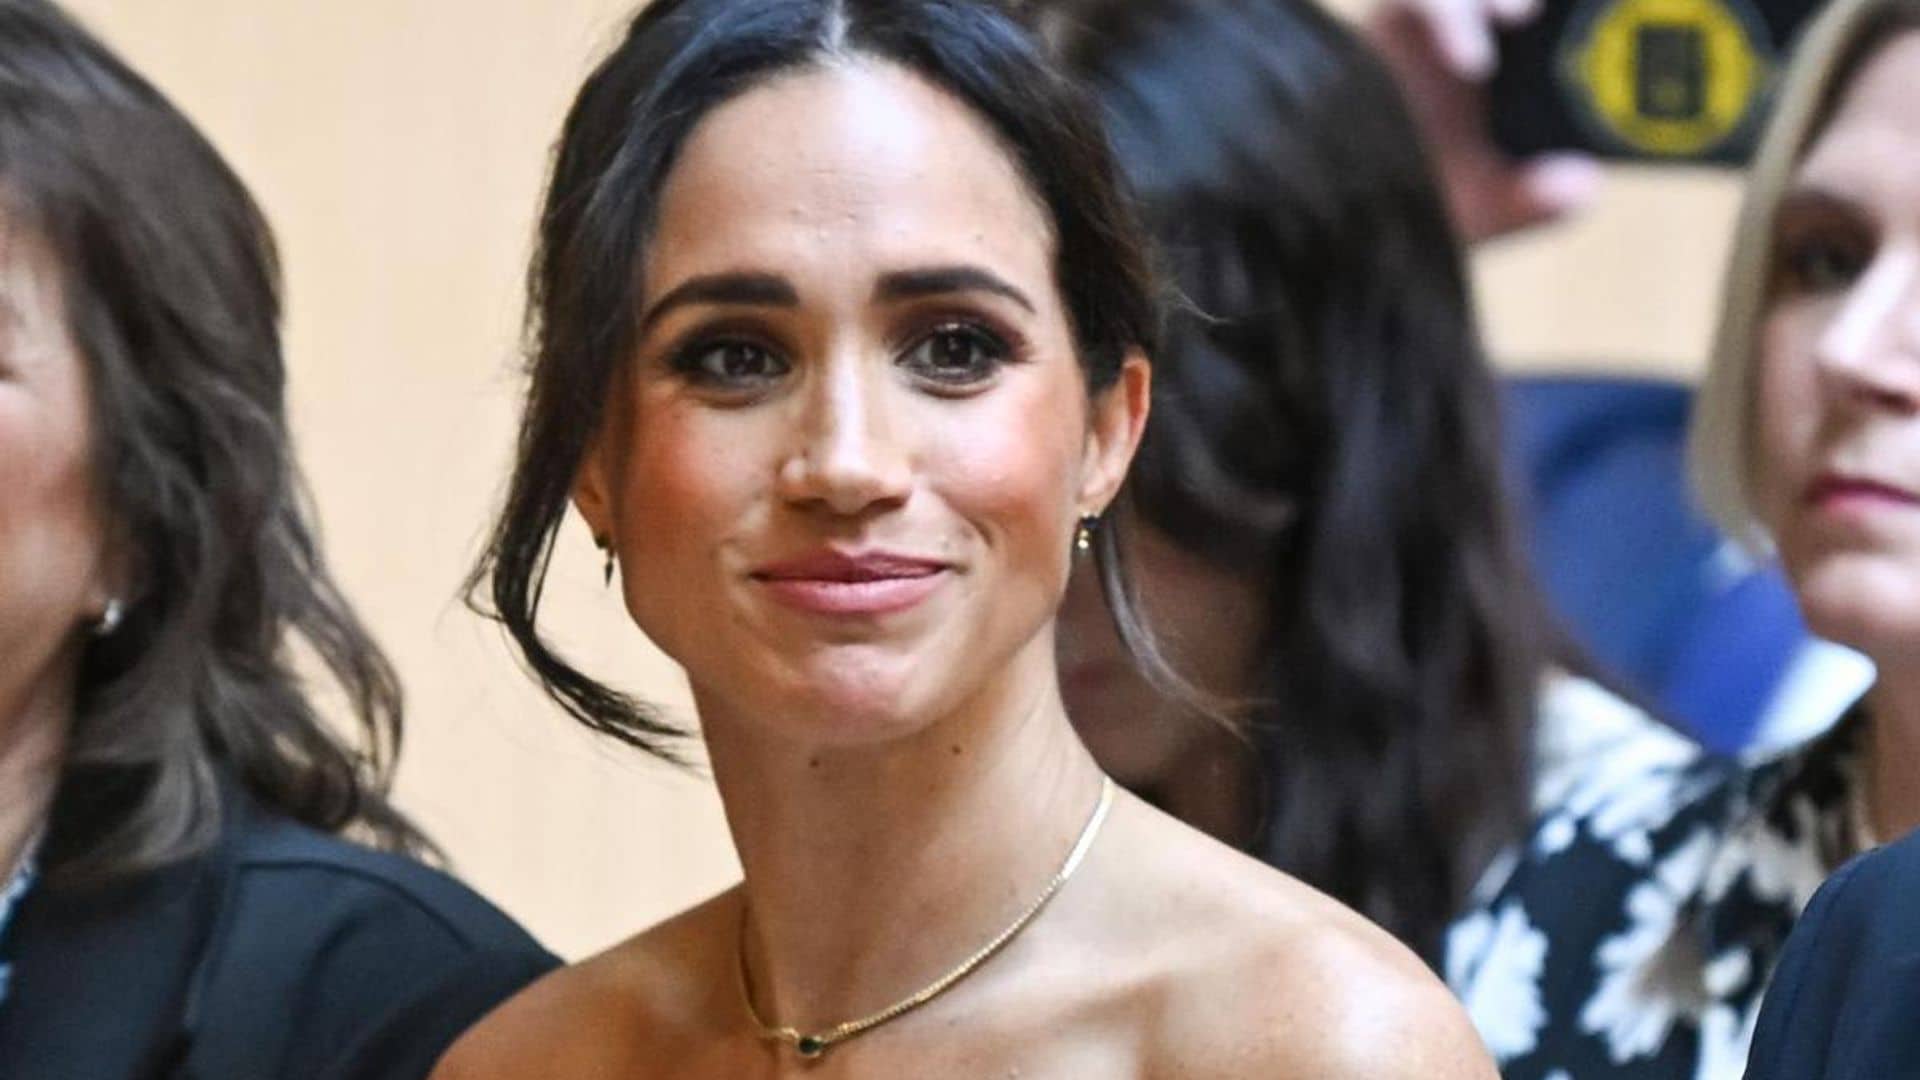 Meghan Markle reveals ‘the most important thing’ in her life